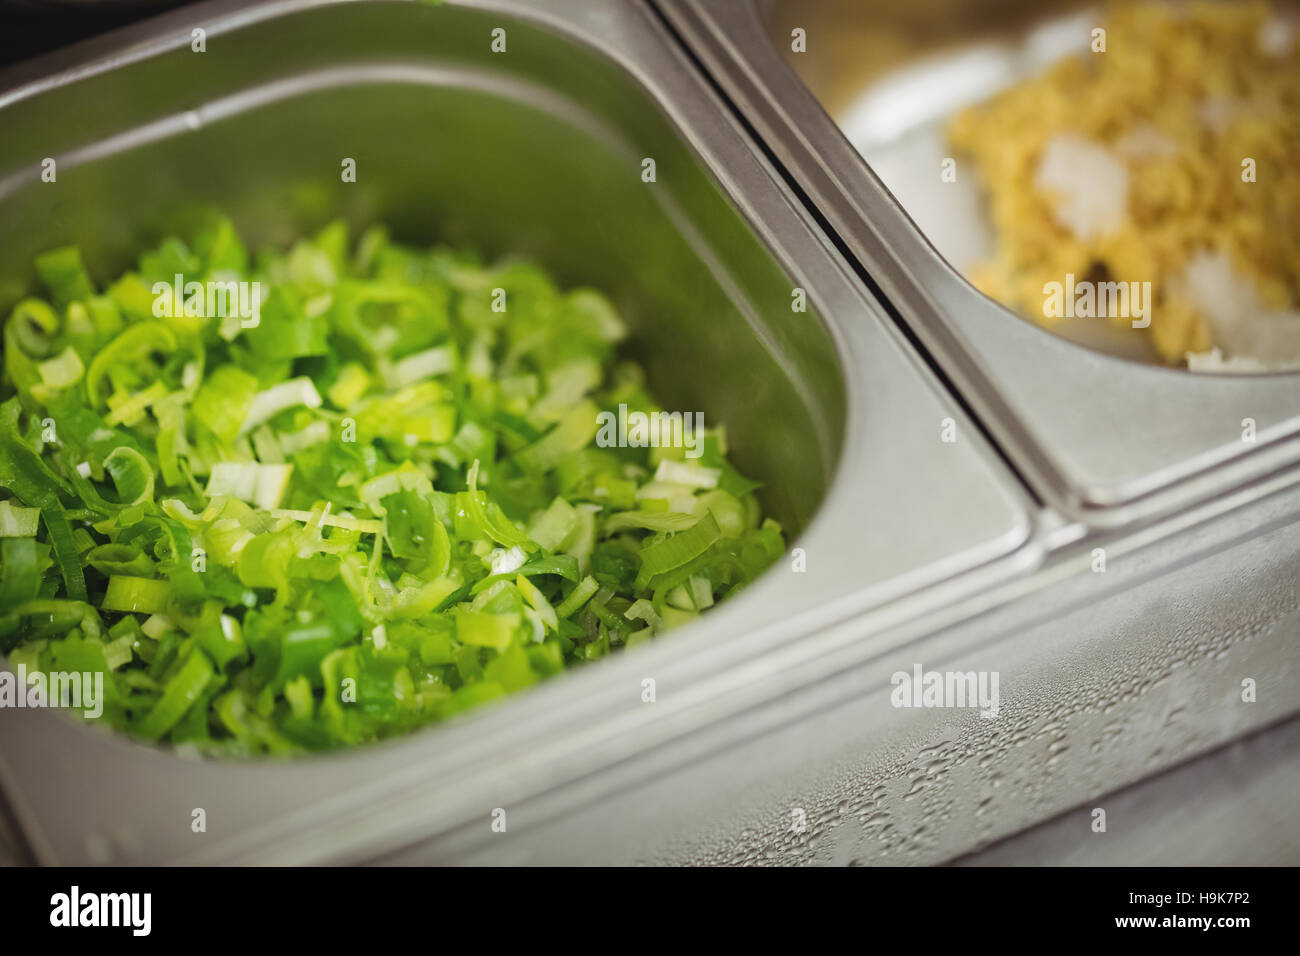 Close-up of chopped leafy vegetable in container Stock Photo